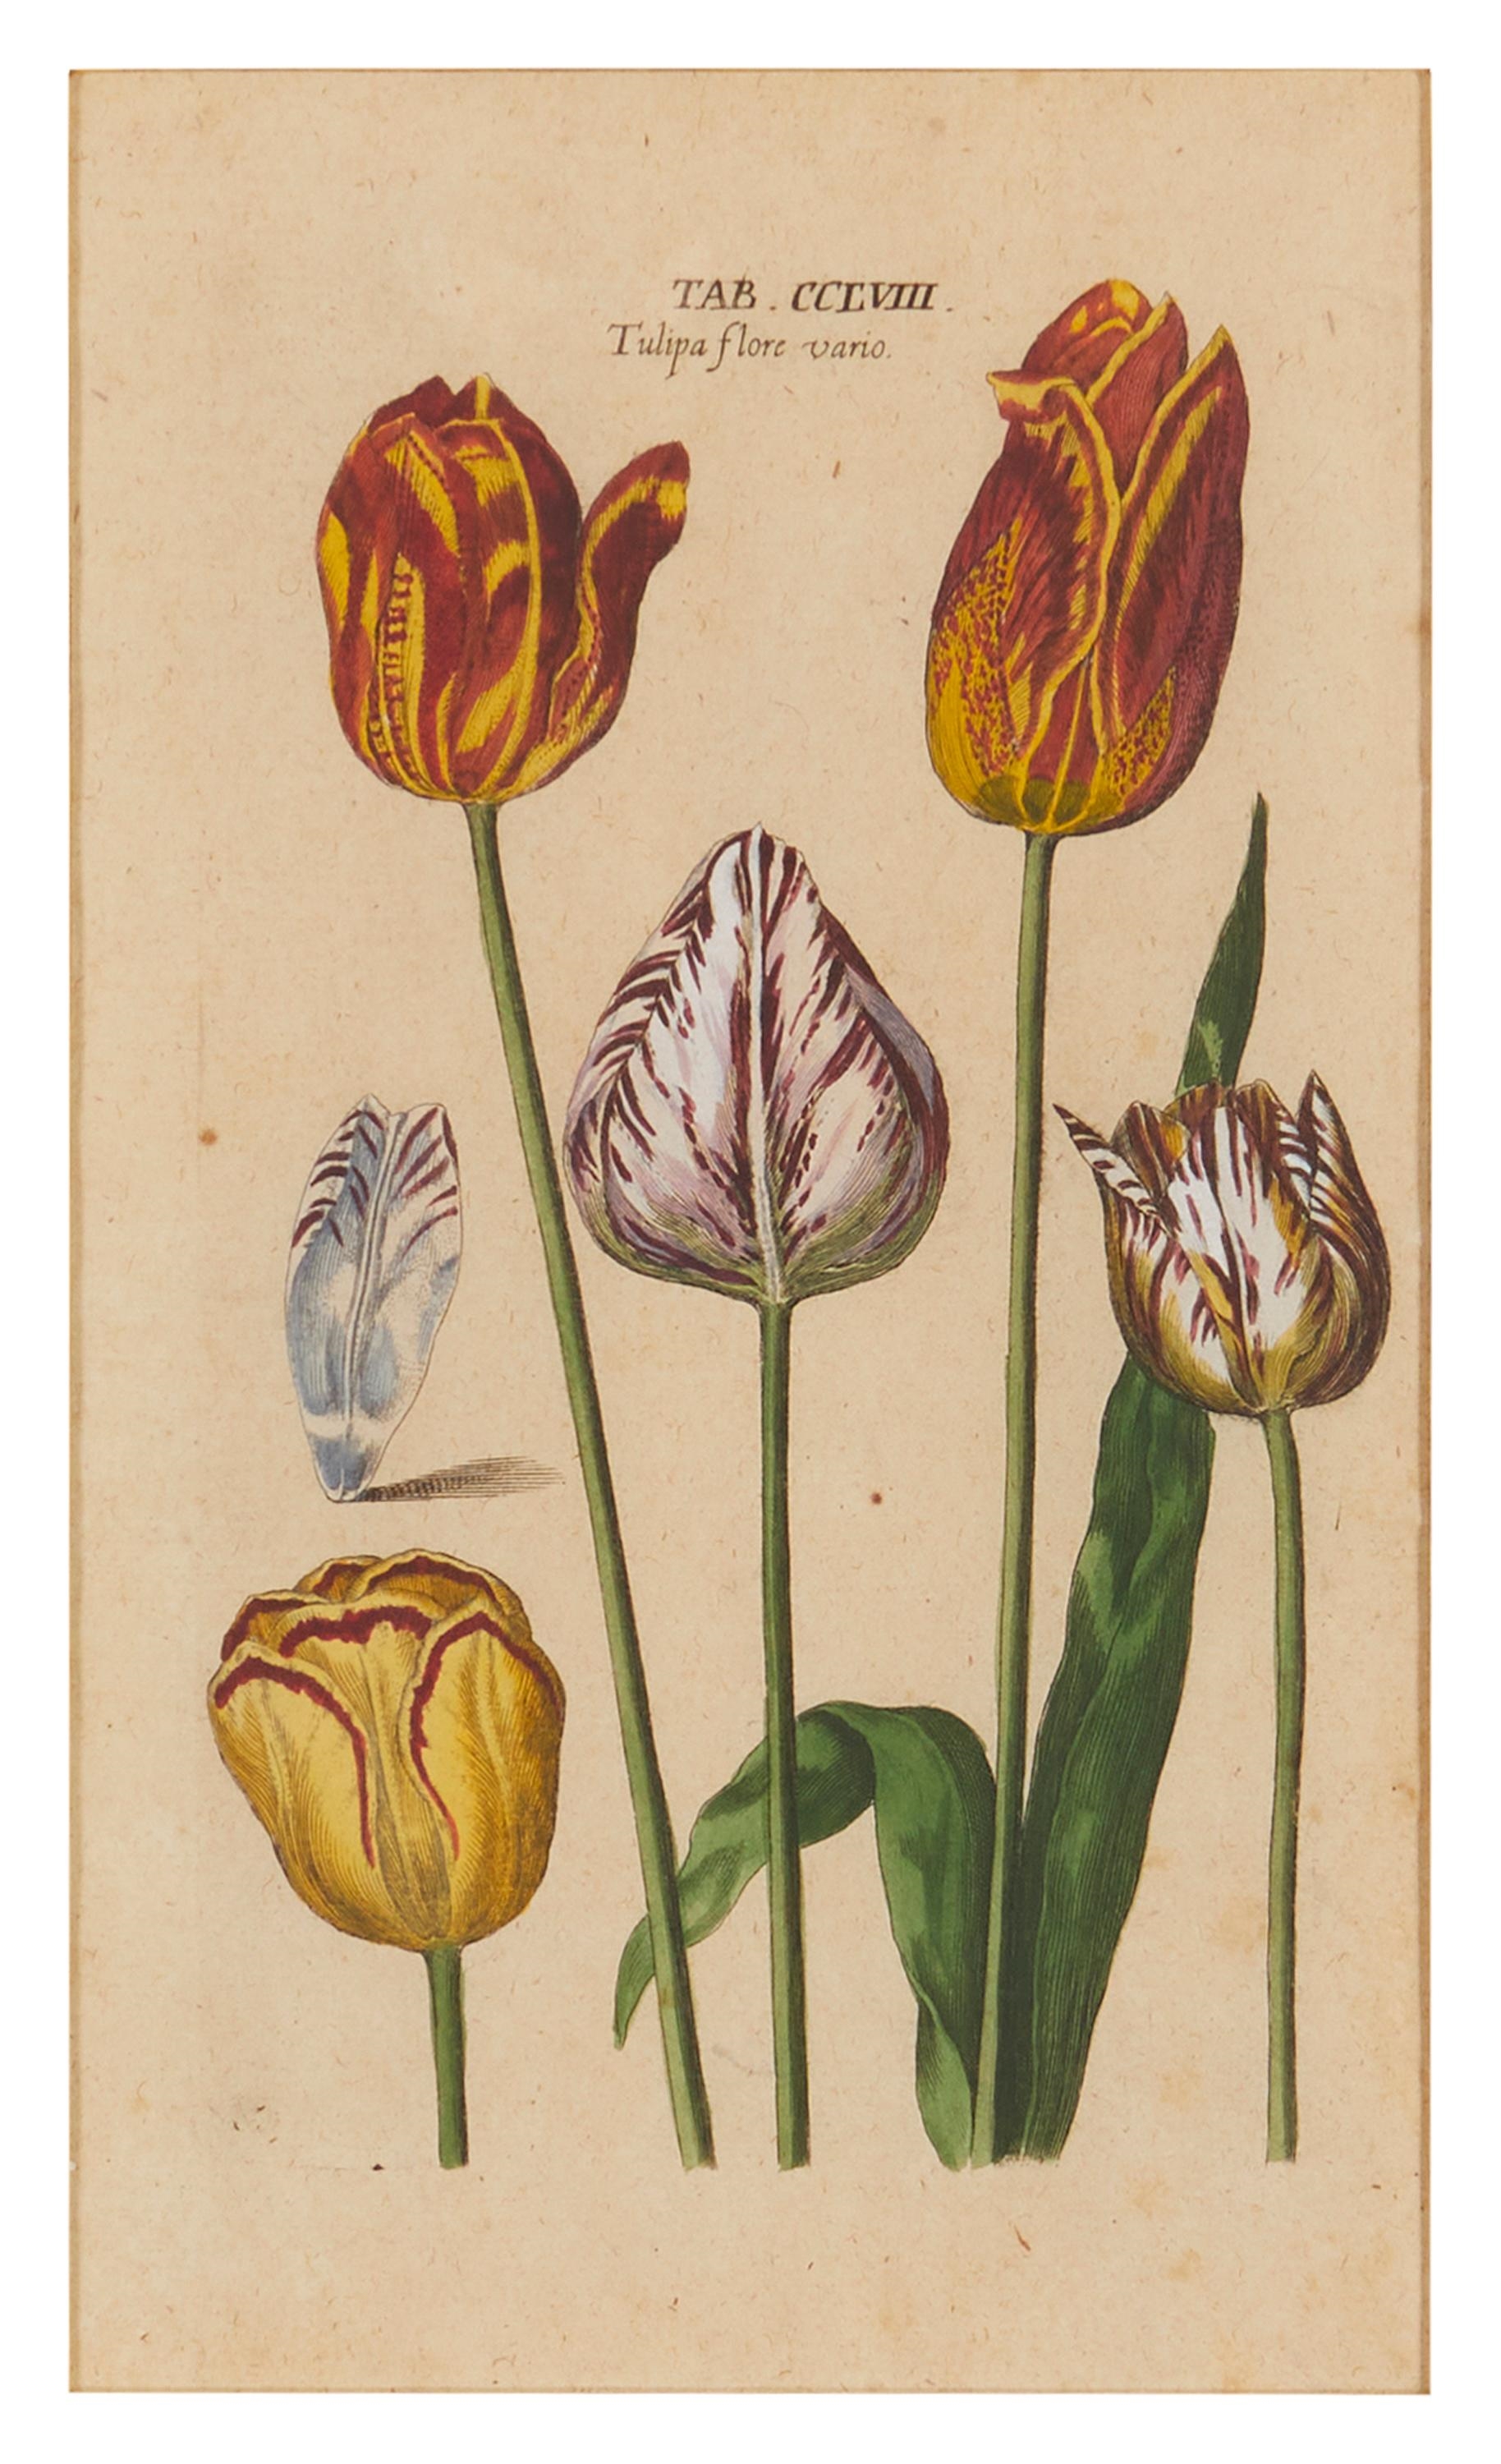 Artwork by Johann Theodor De Bry, "Paonia...;" "Come...;" Tulipa...;" and Fritillaria...,", Made of Engravings with hand coloring